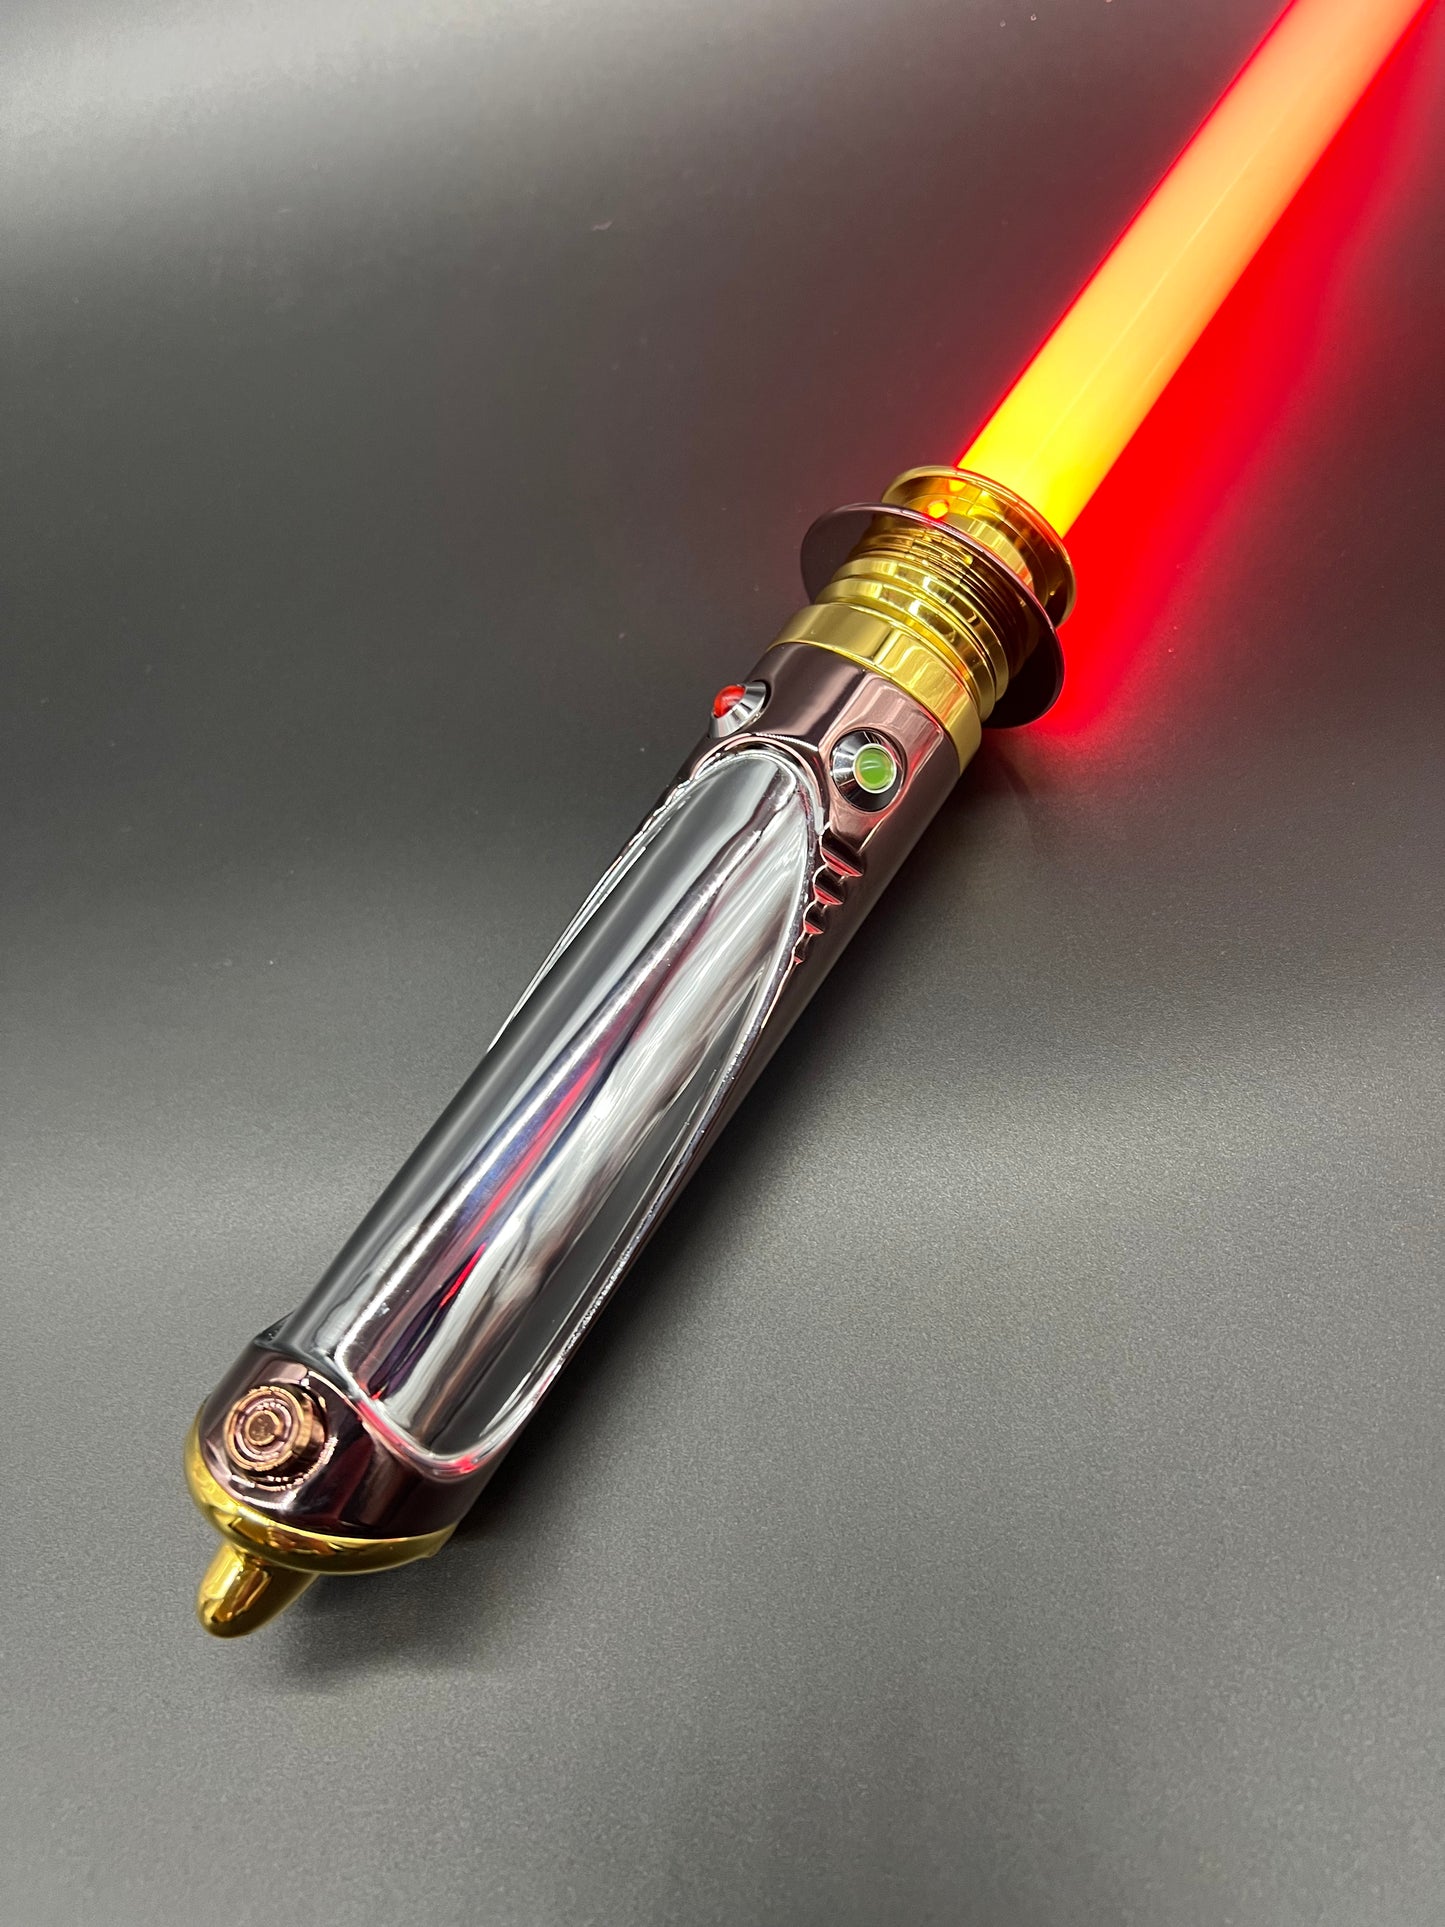 THE UNLIMITED POWER LIGHTSABER